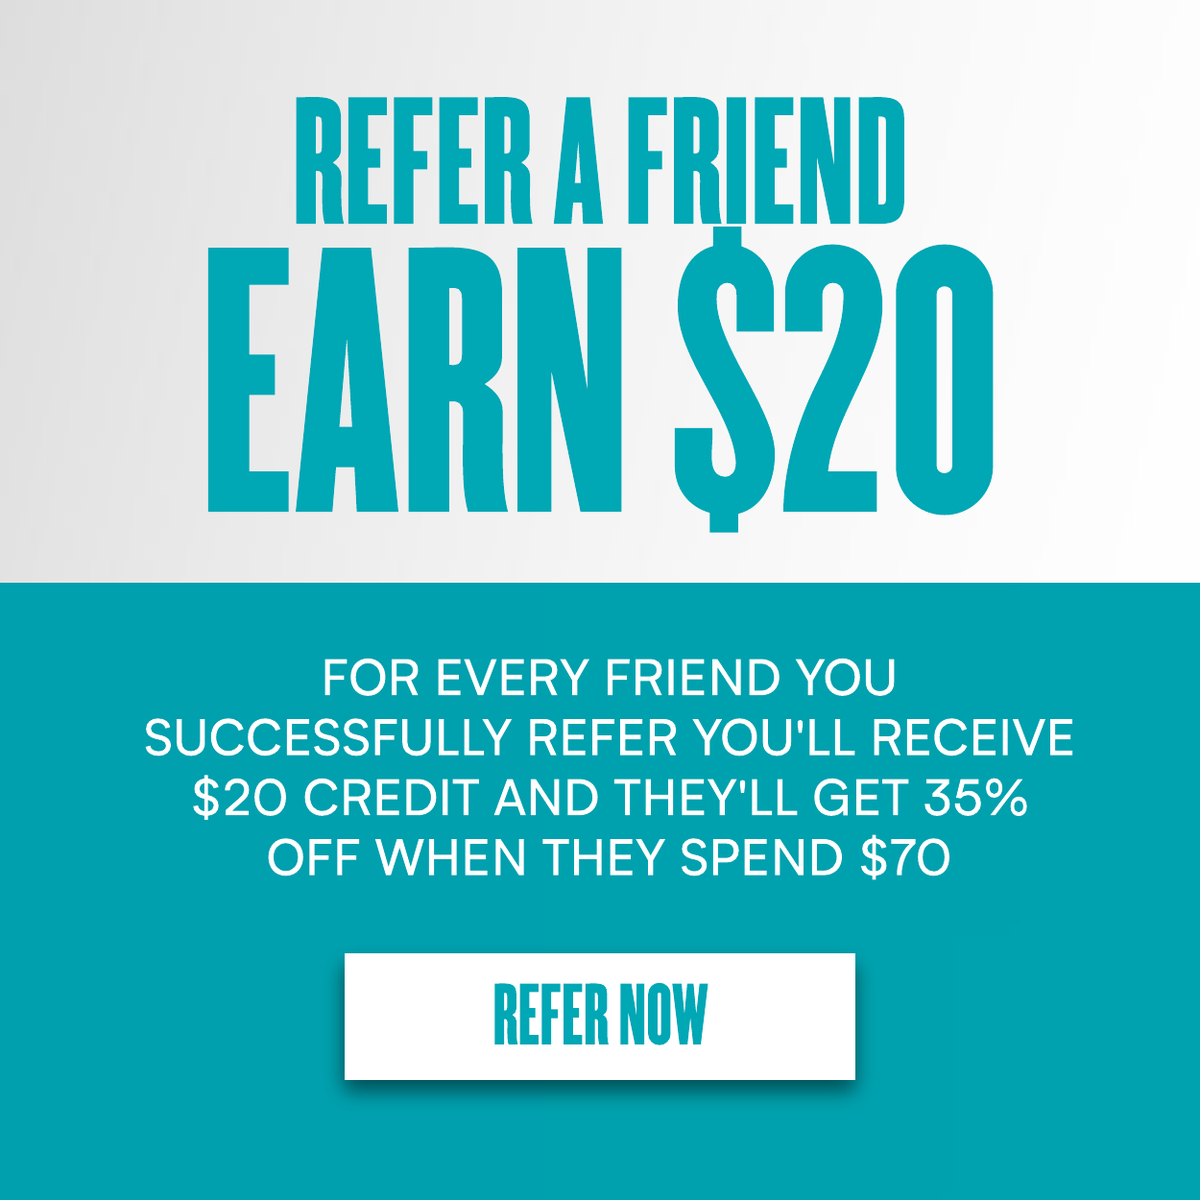 Refer a friend and earn $20